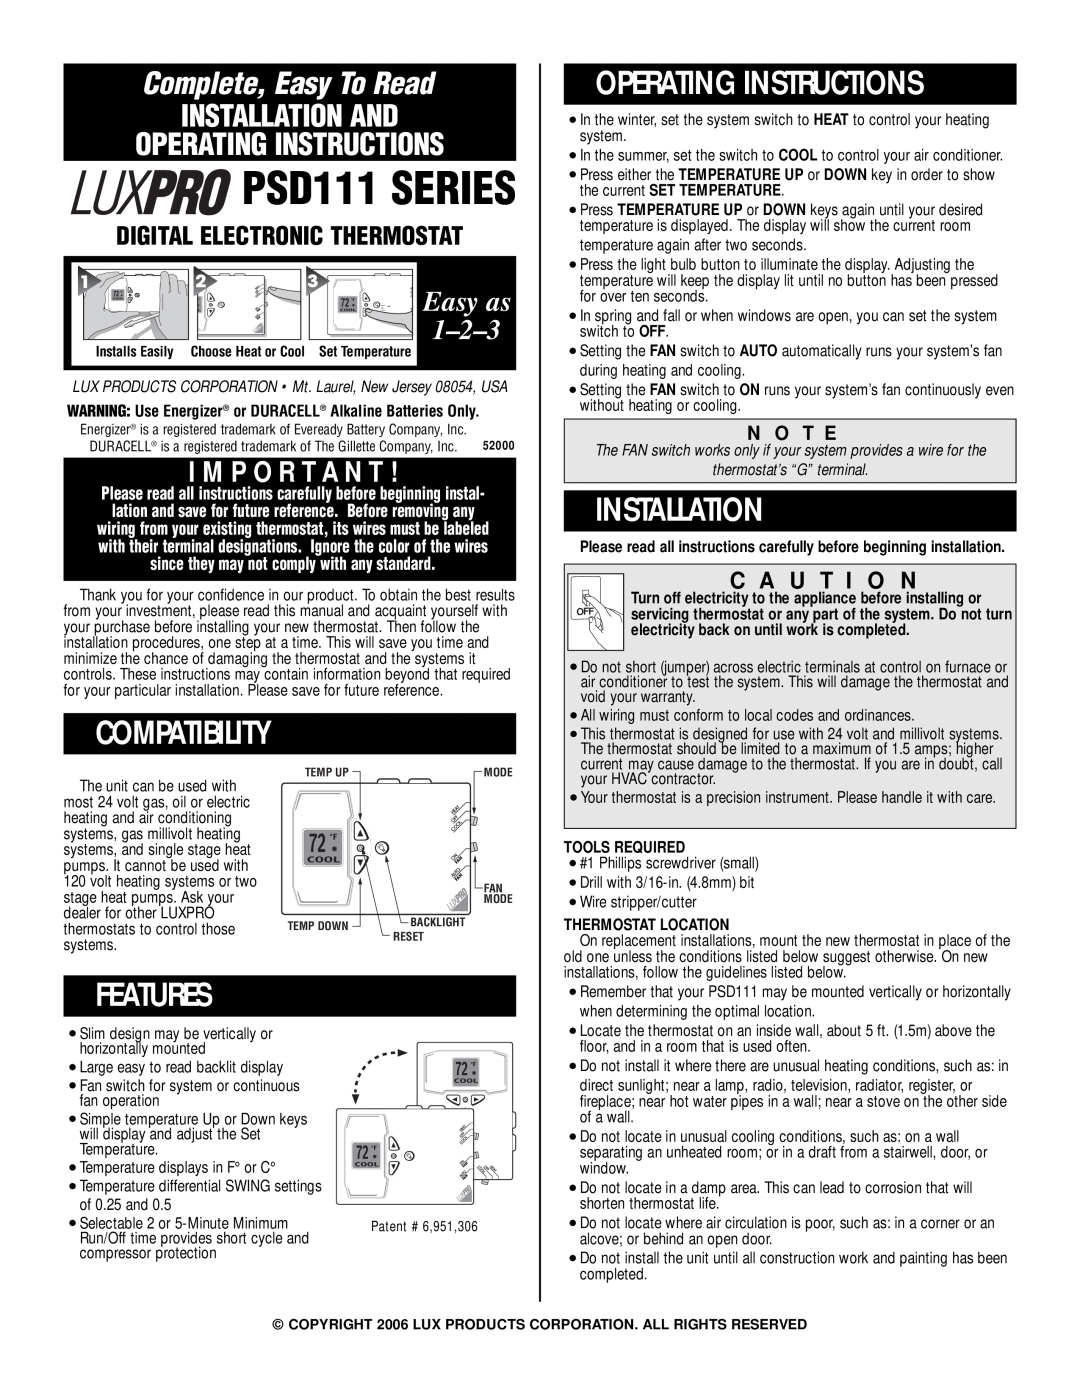 Lux Products PSD111 warranty Operating Instructions, Installation, Compatibility, Features, N O T E, Tools Required, 1-2-3 